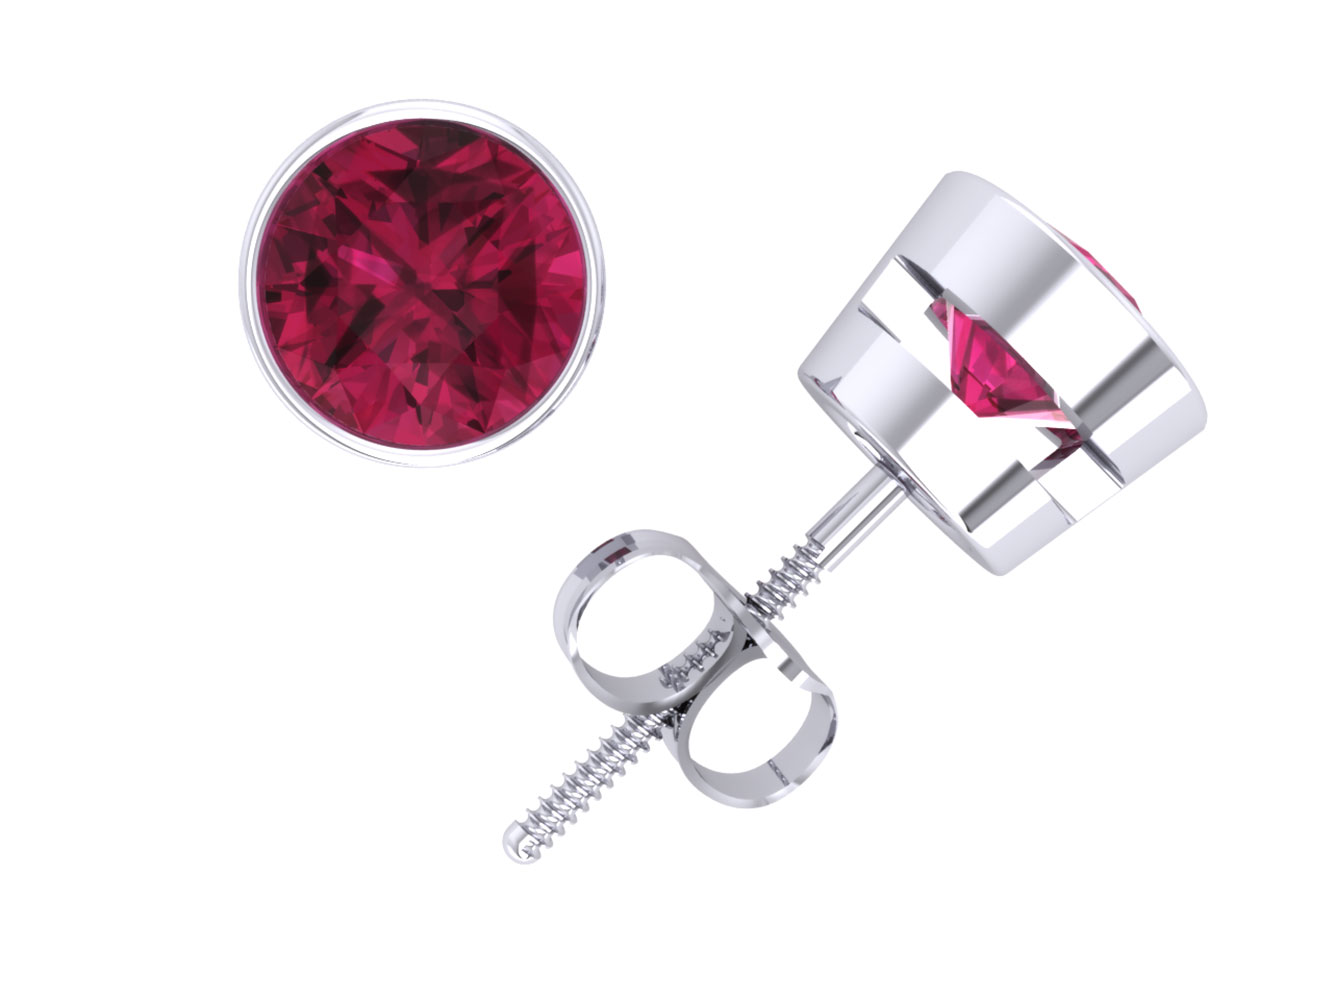 Jewel We Sell Genuine 1.00Ct Round Cut Pink Sapphire Stud Earrings 14k White or Yellow Gold Bezel Screwback AA Quality